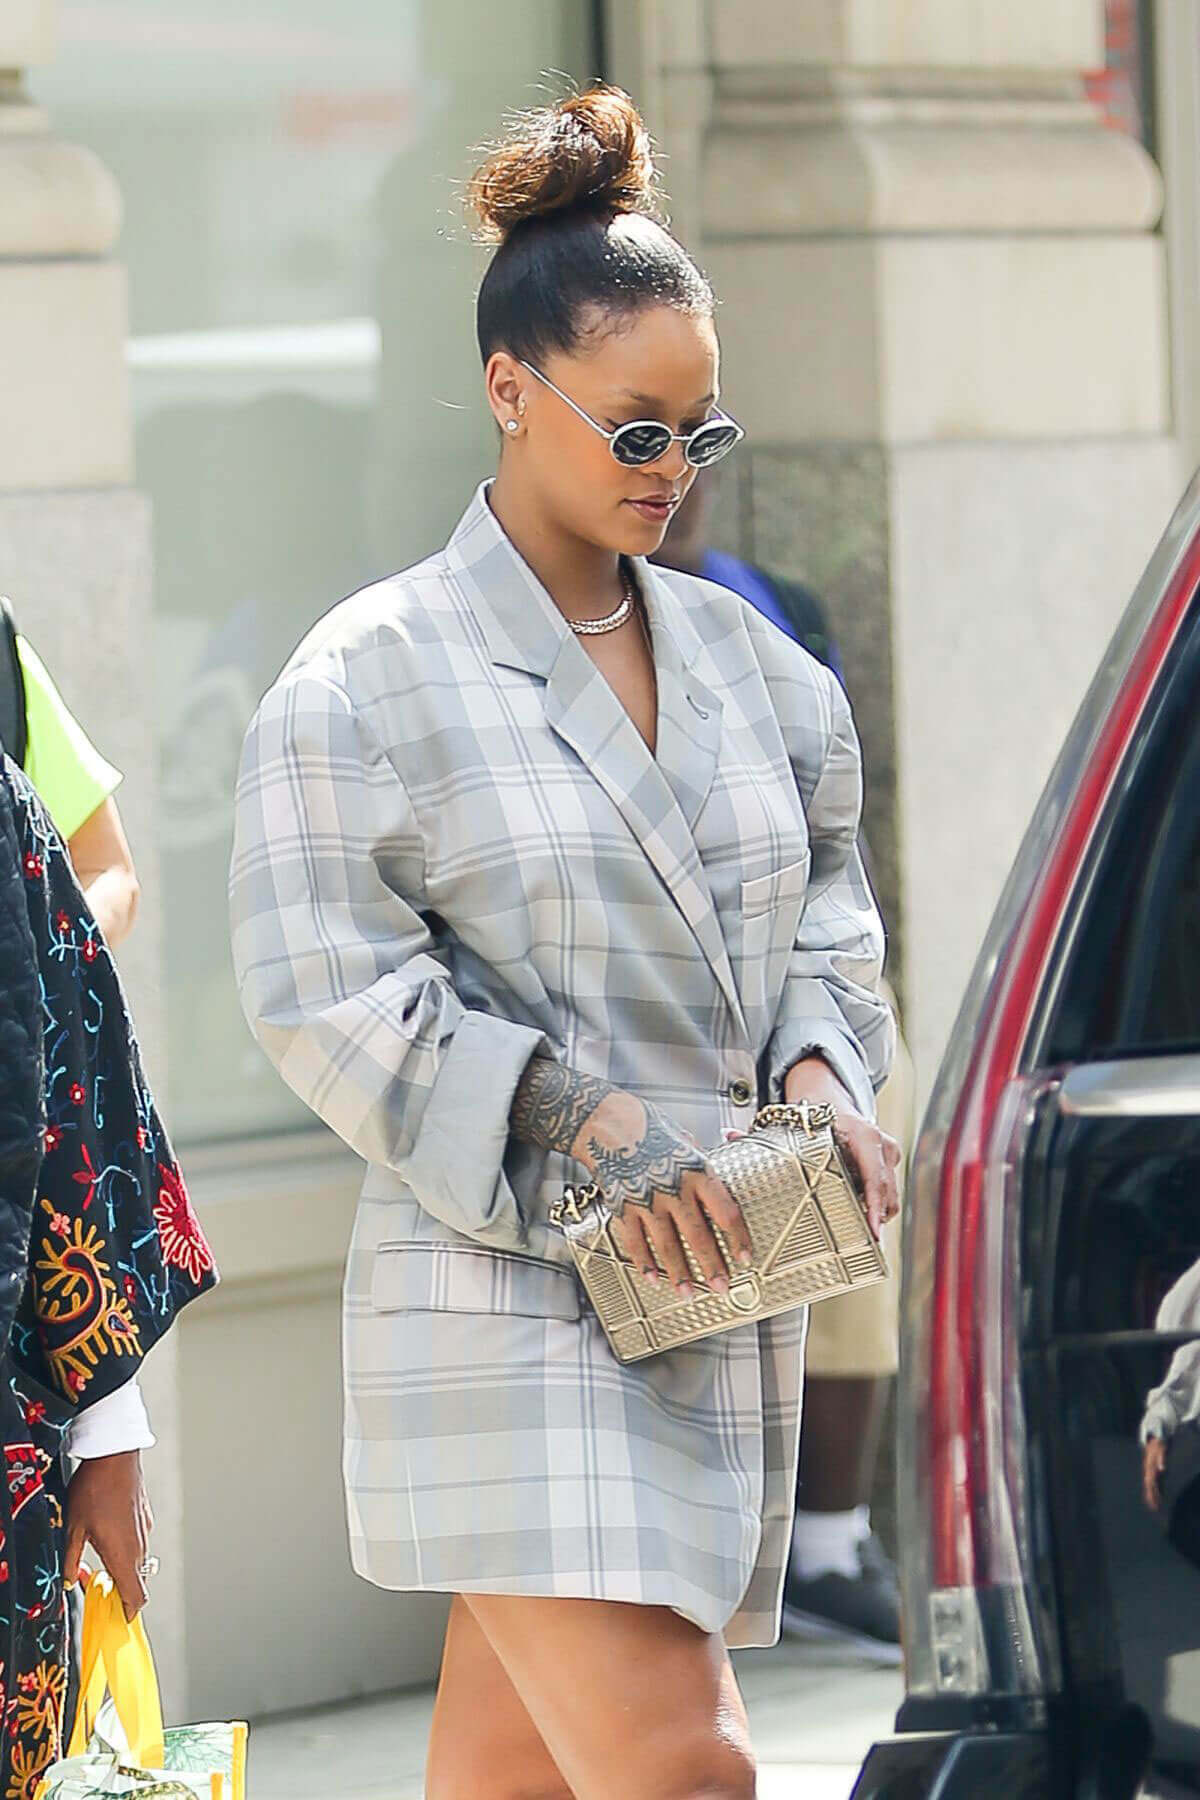 Rihanna without Bottom shows off legs to Brooklyn Navy Yard in New York